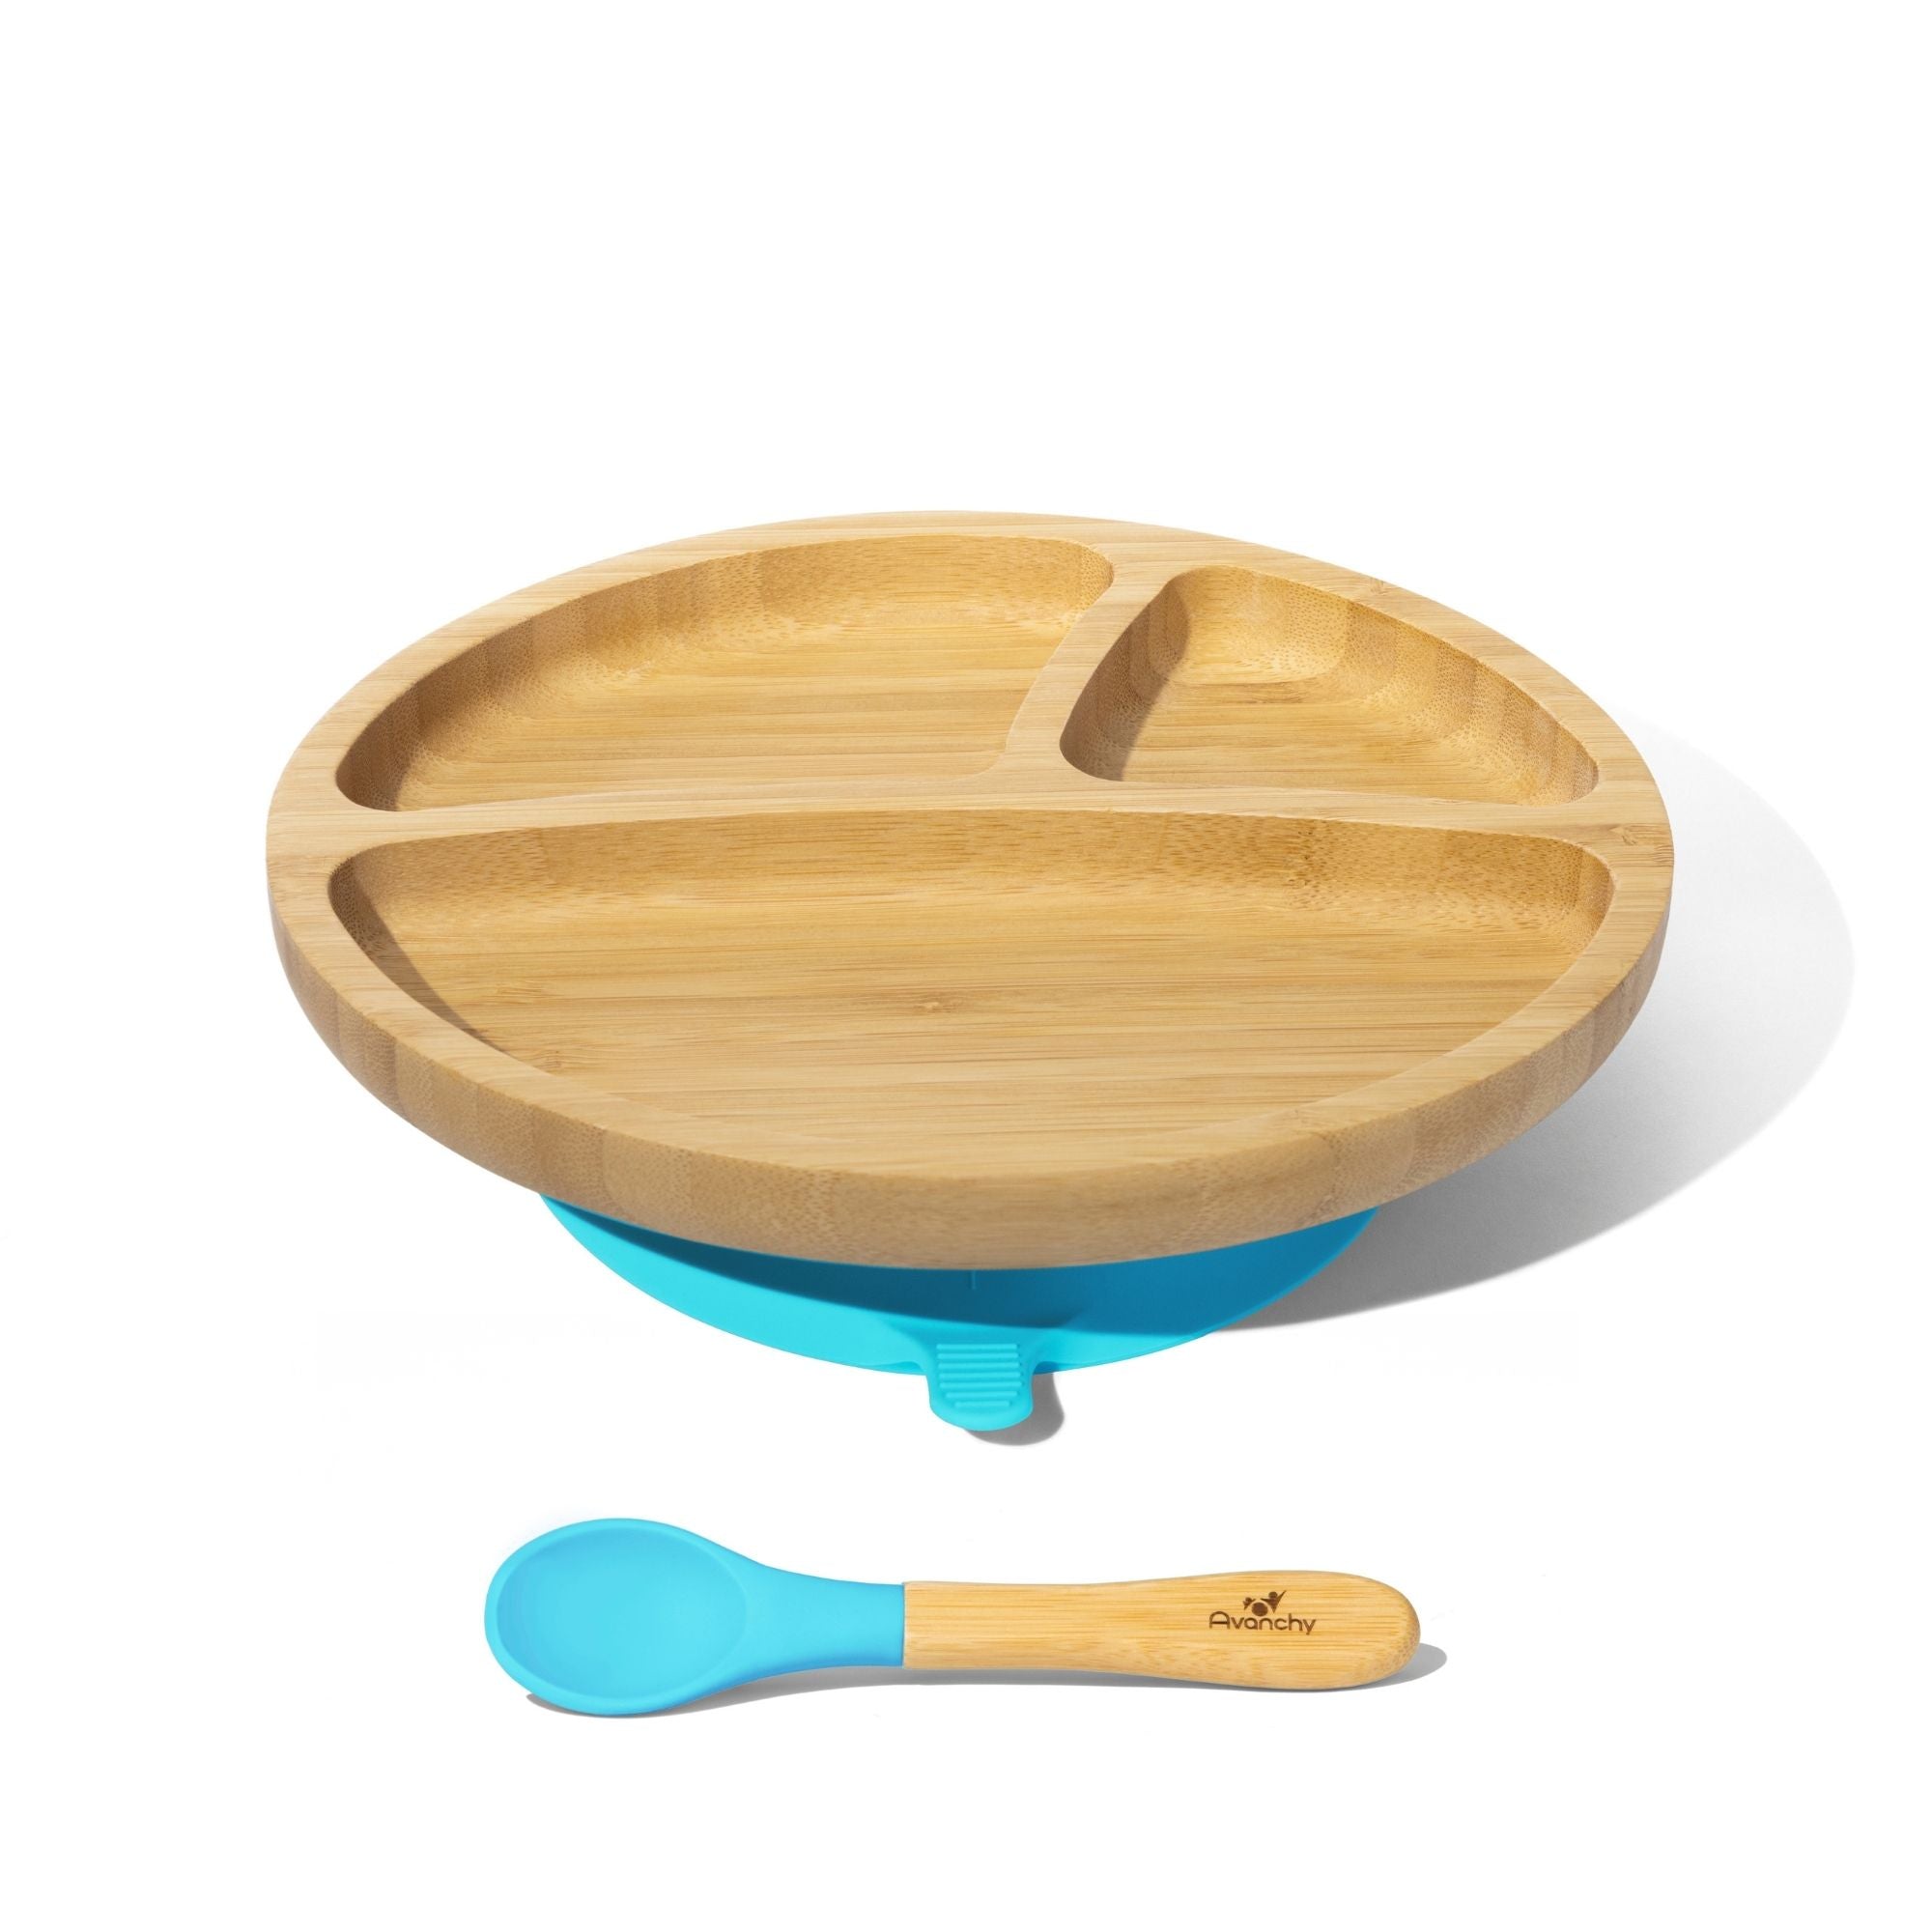 Avanchy Bamboo Toddler Plate & Spoon - Magenta